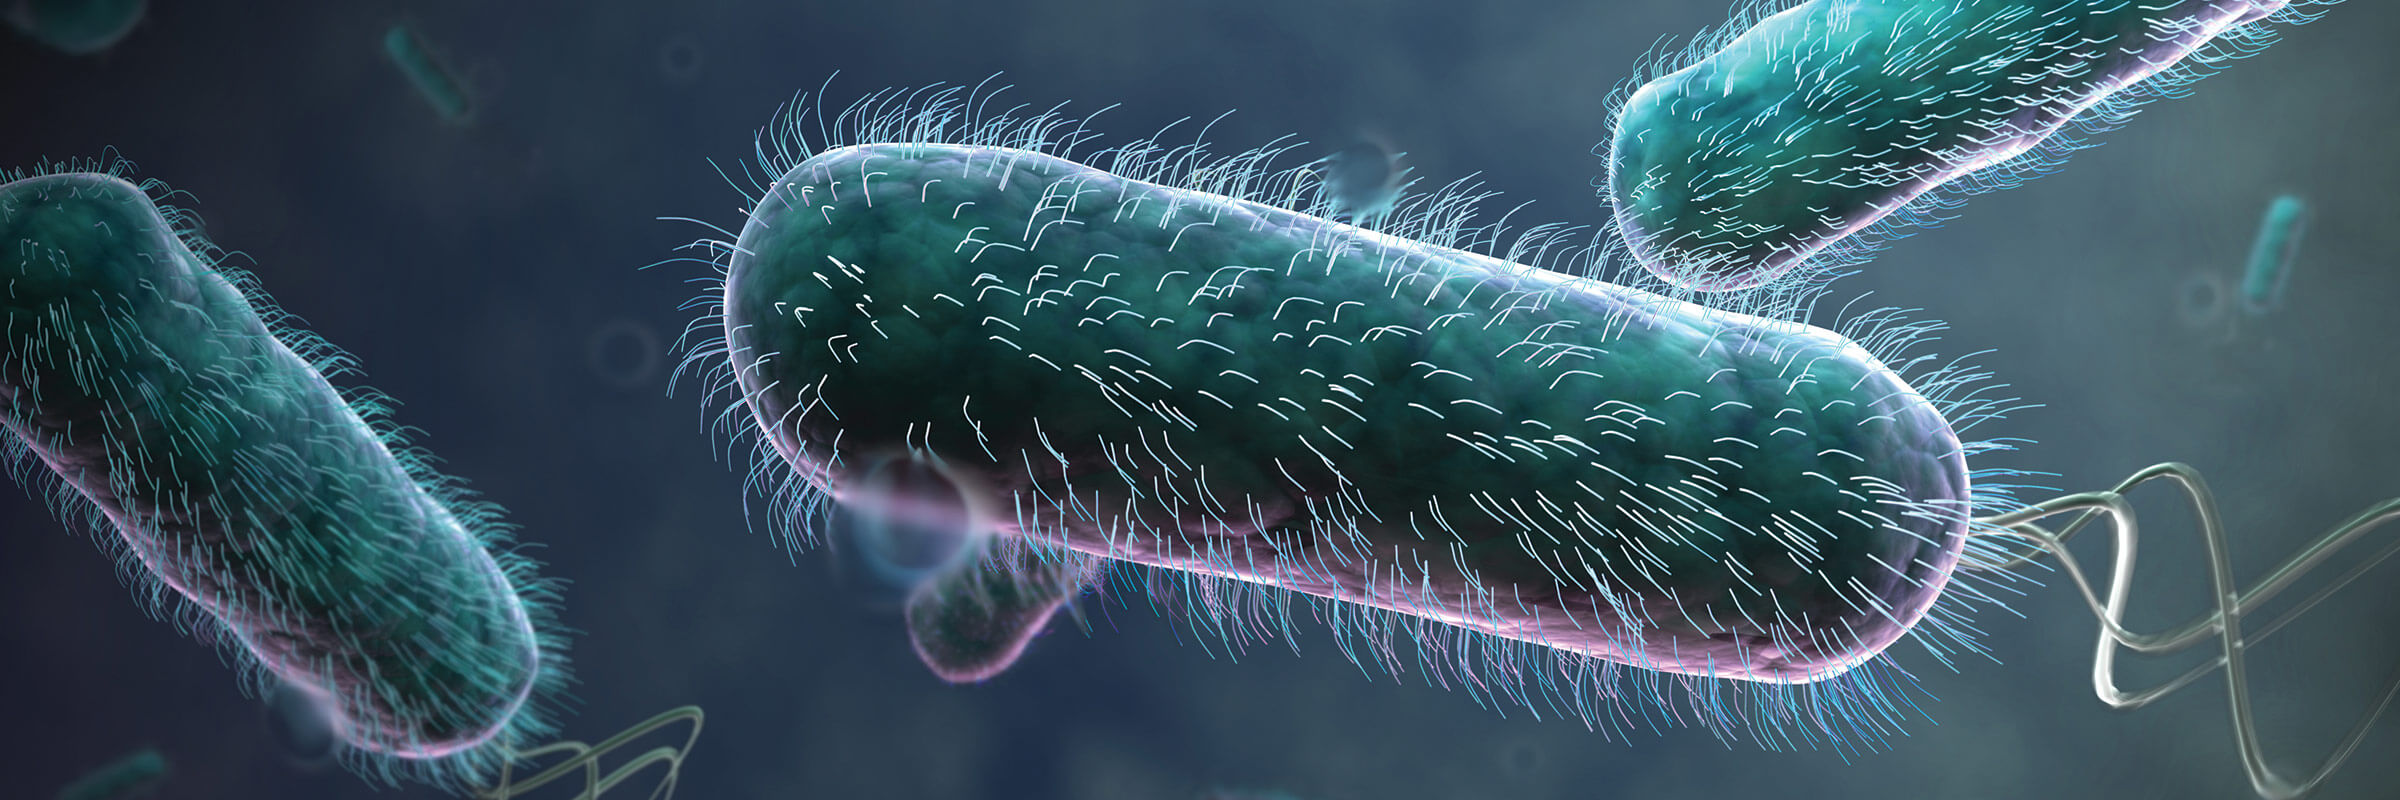 How the ongoing global pandemic drives Legionella concerns